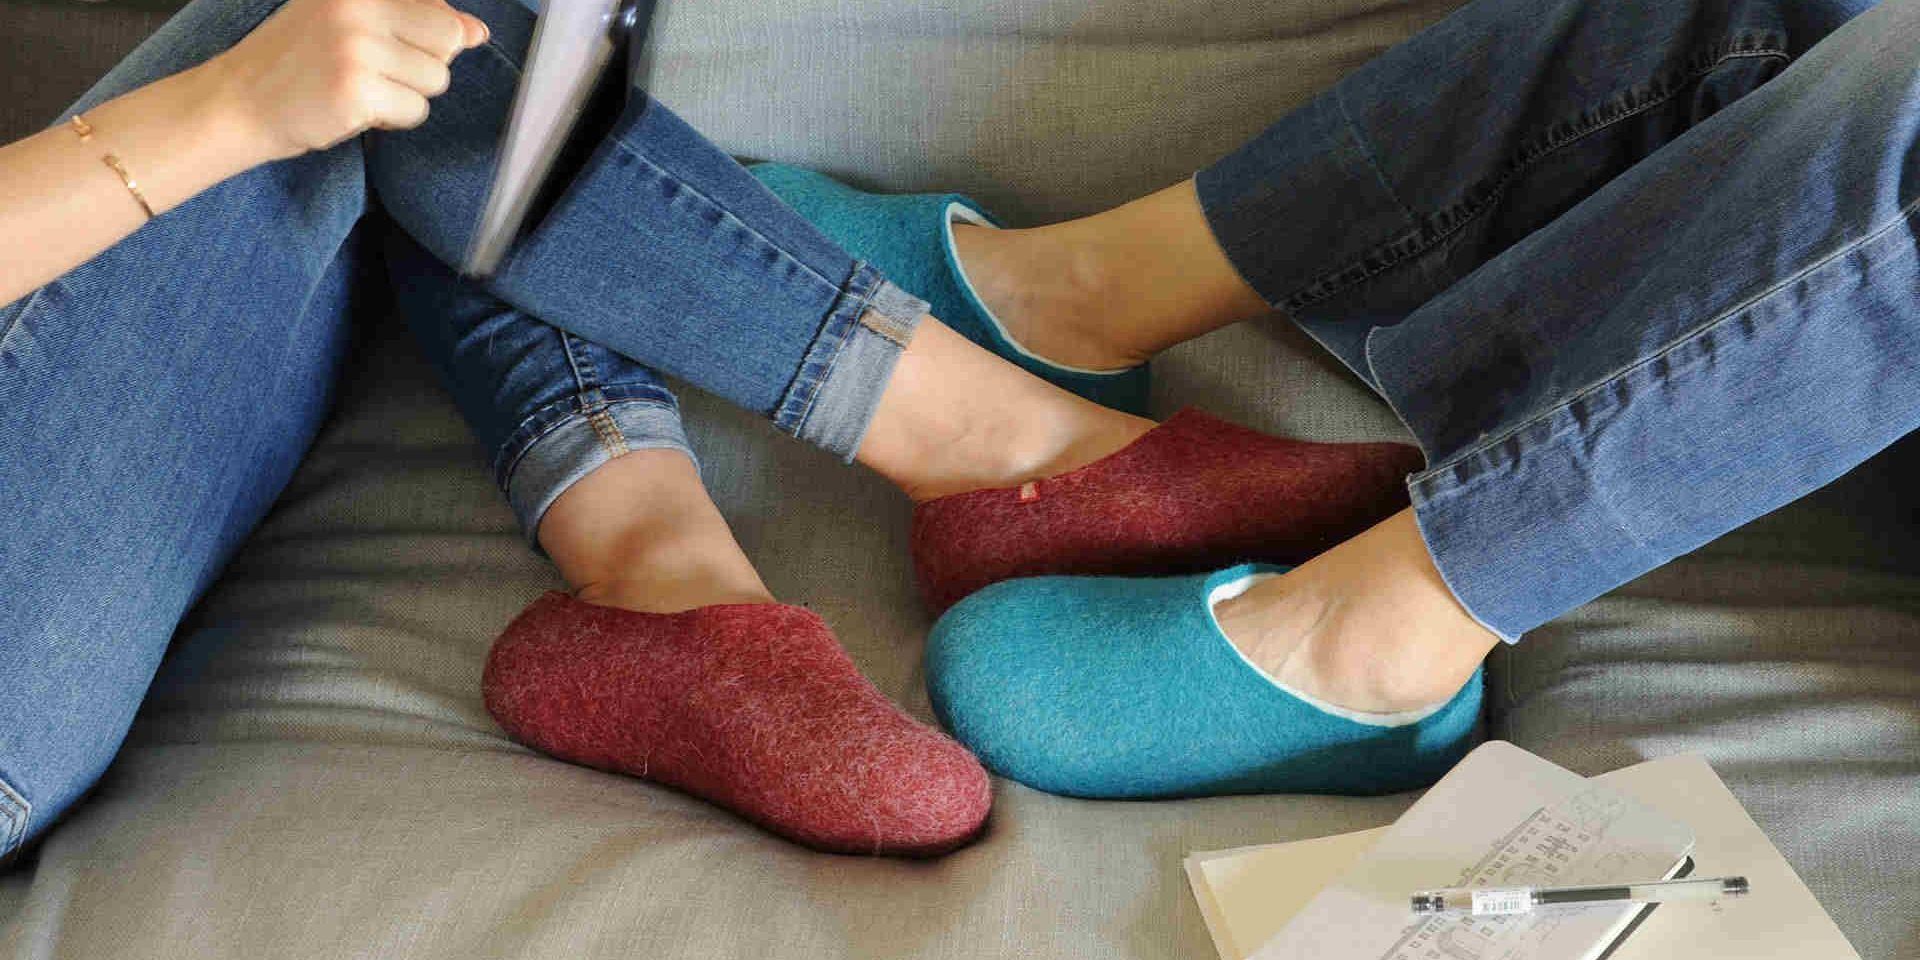 washable slippers with arch support